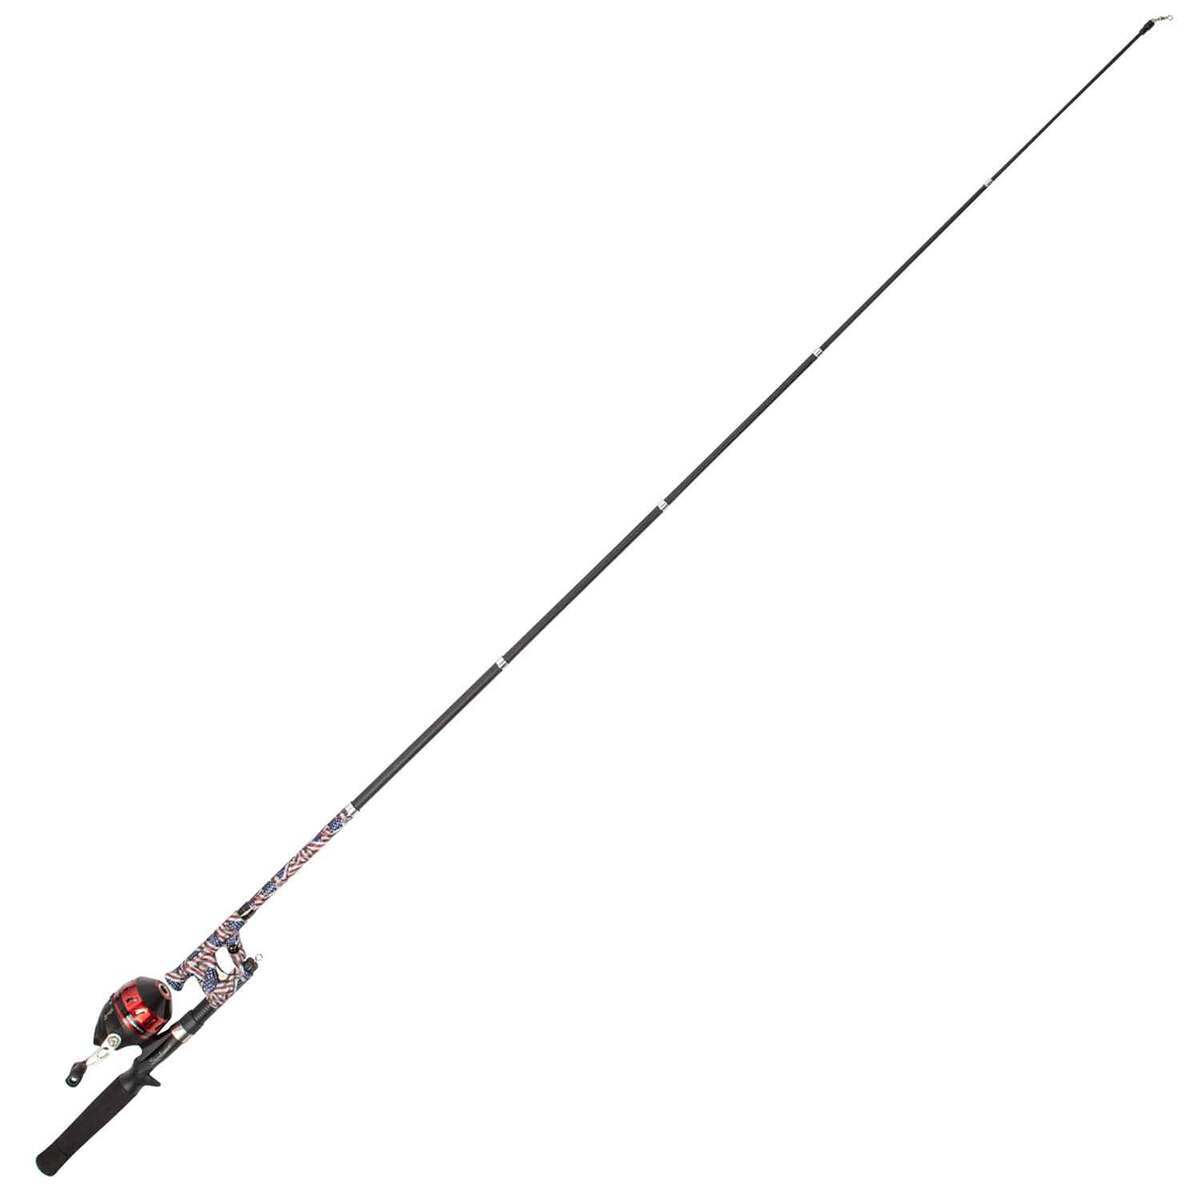 Profishiency USA Flag Travel Spincast Rod and Reel Combo - 5ft 6in